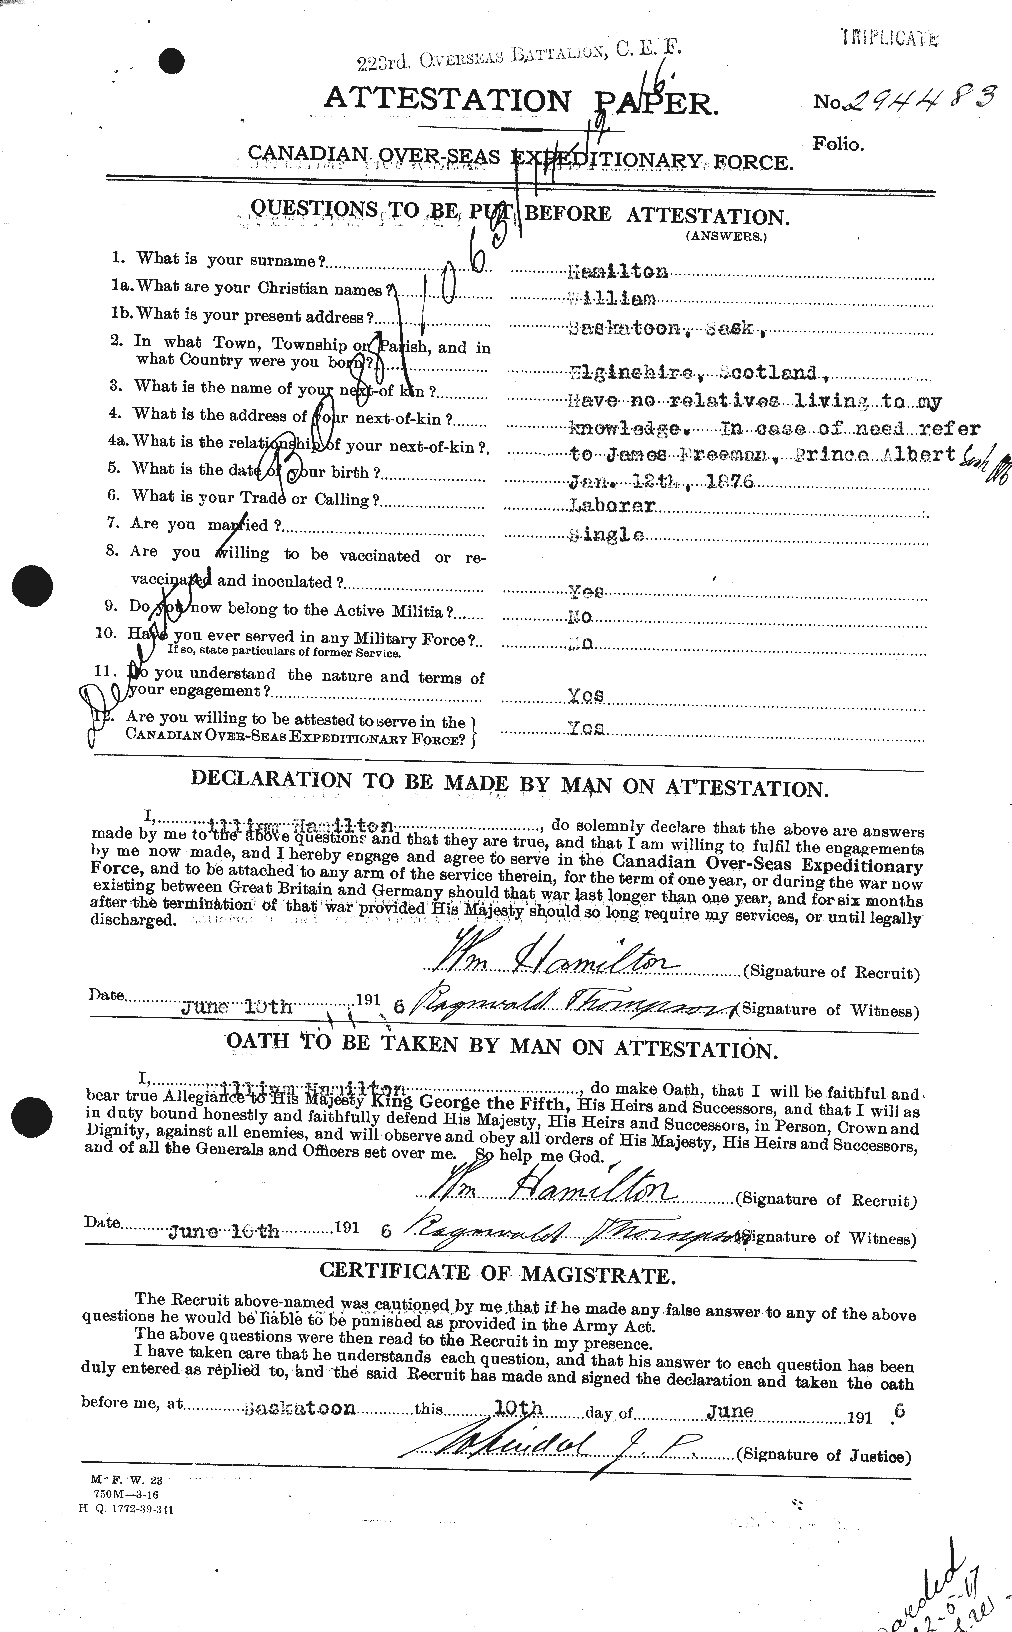 Personnel Records of the First World War - CEF 374856a